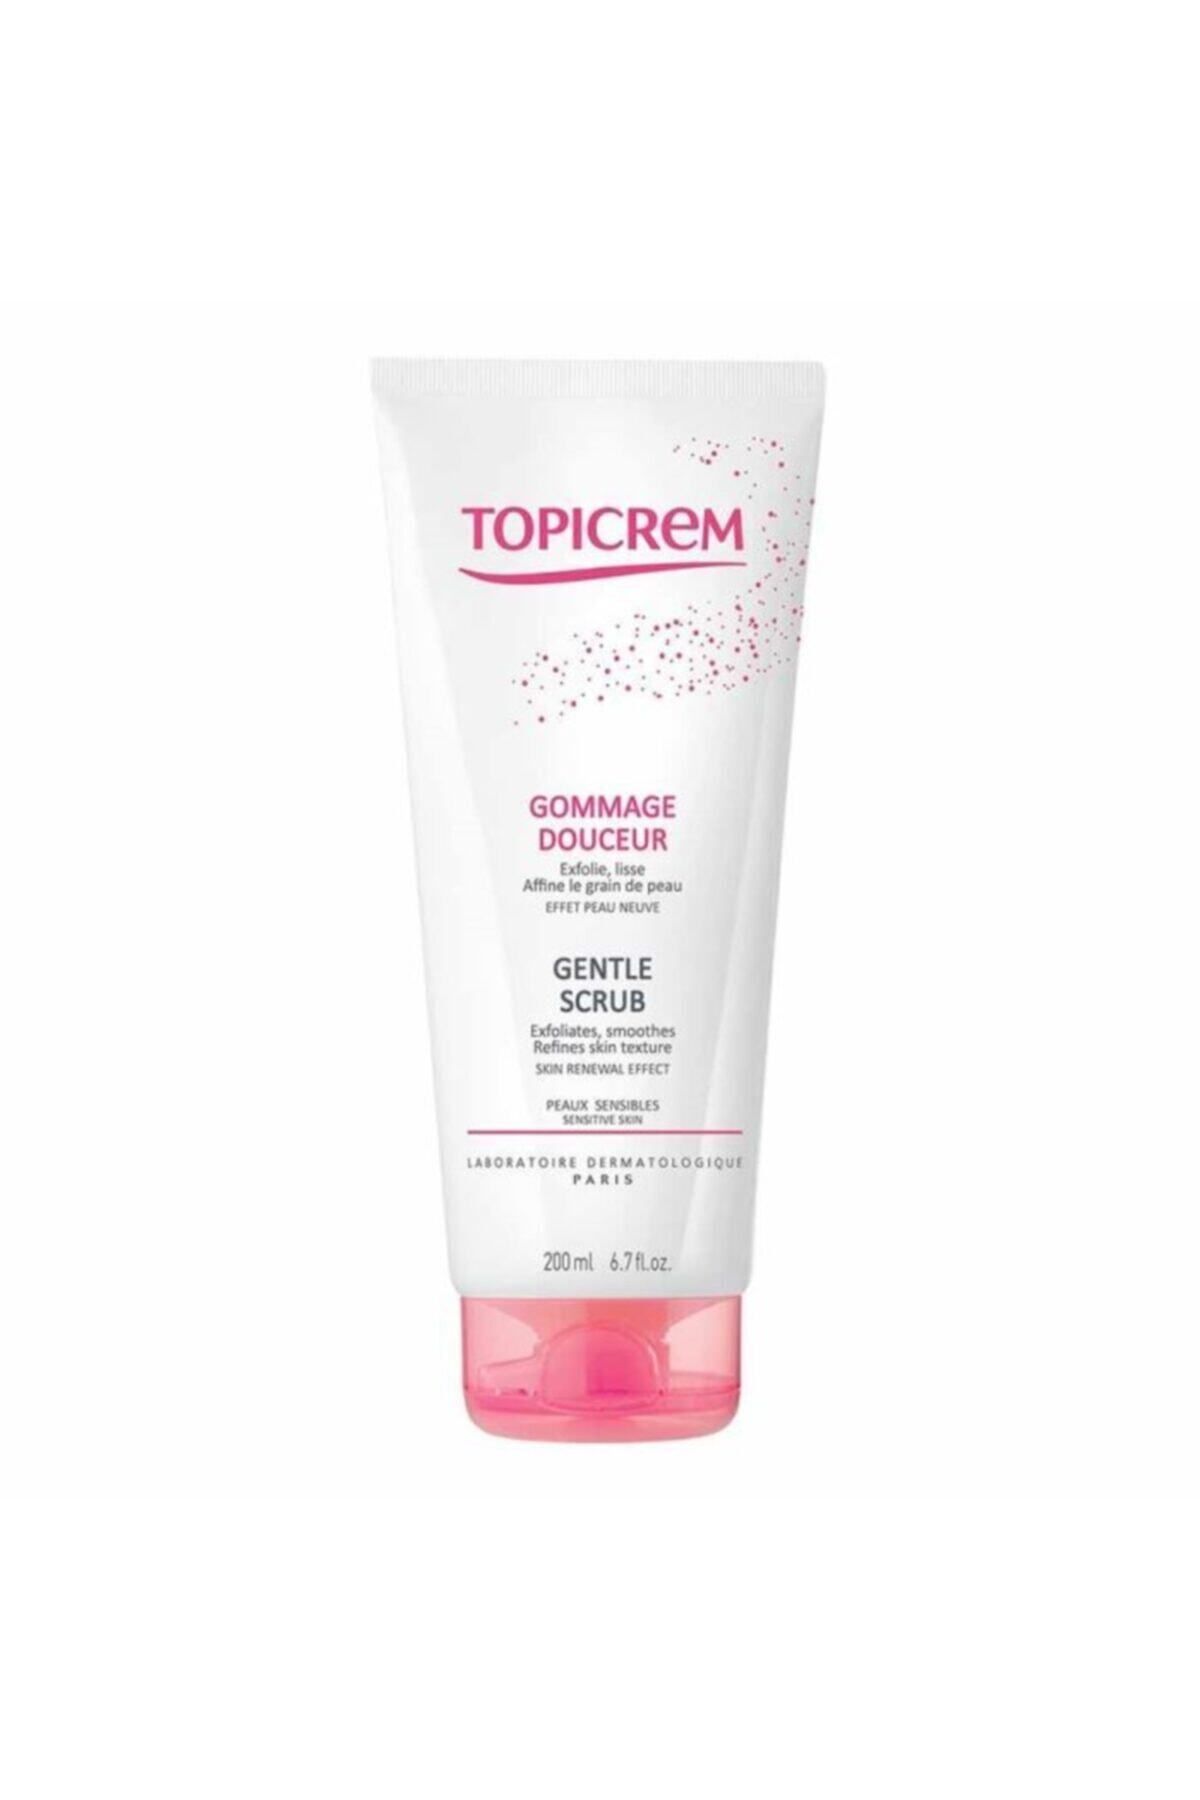 Topicrem Gommage Douceur Gentle Scrub Face & Body 200 ml